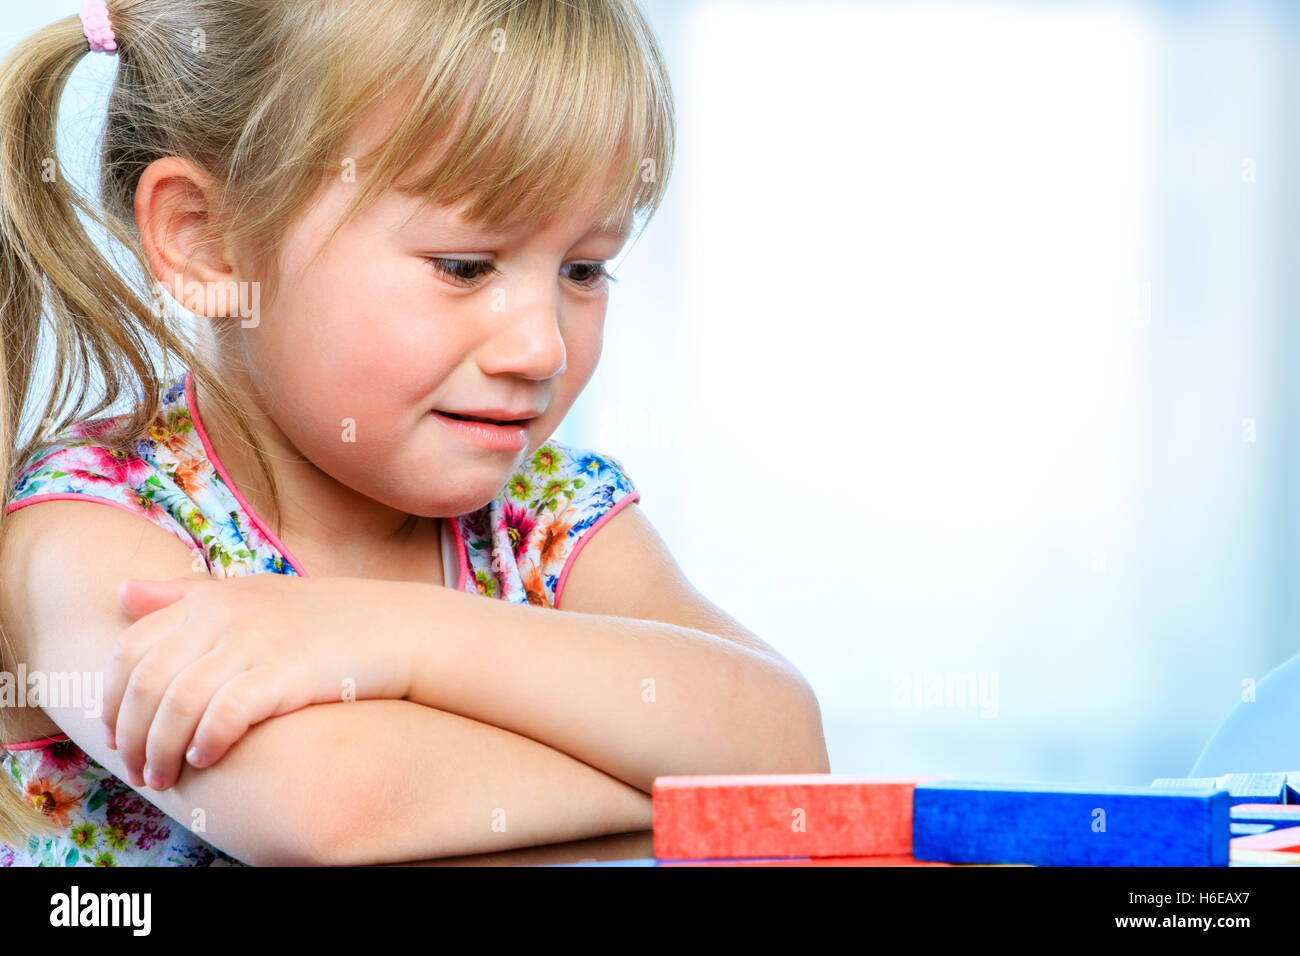 Close up portrait of unhappy little girl at table with educational game. Infant showing miserable sad face expression. Stock Photo